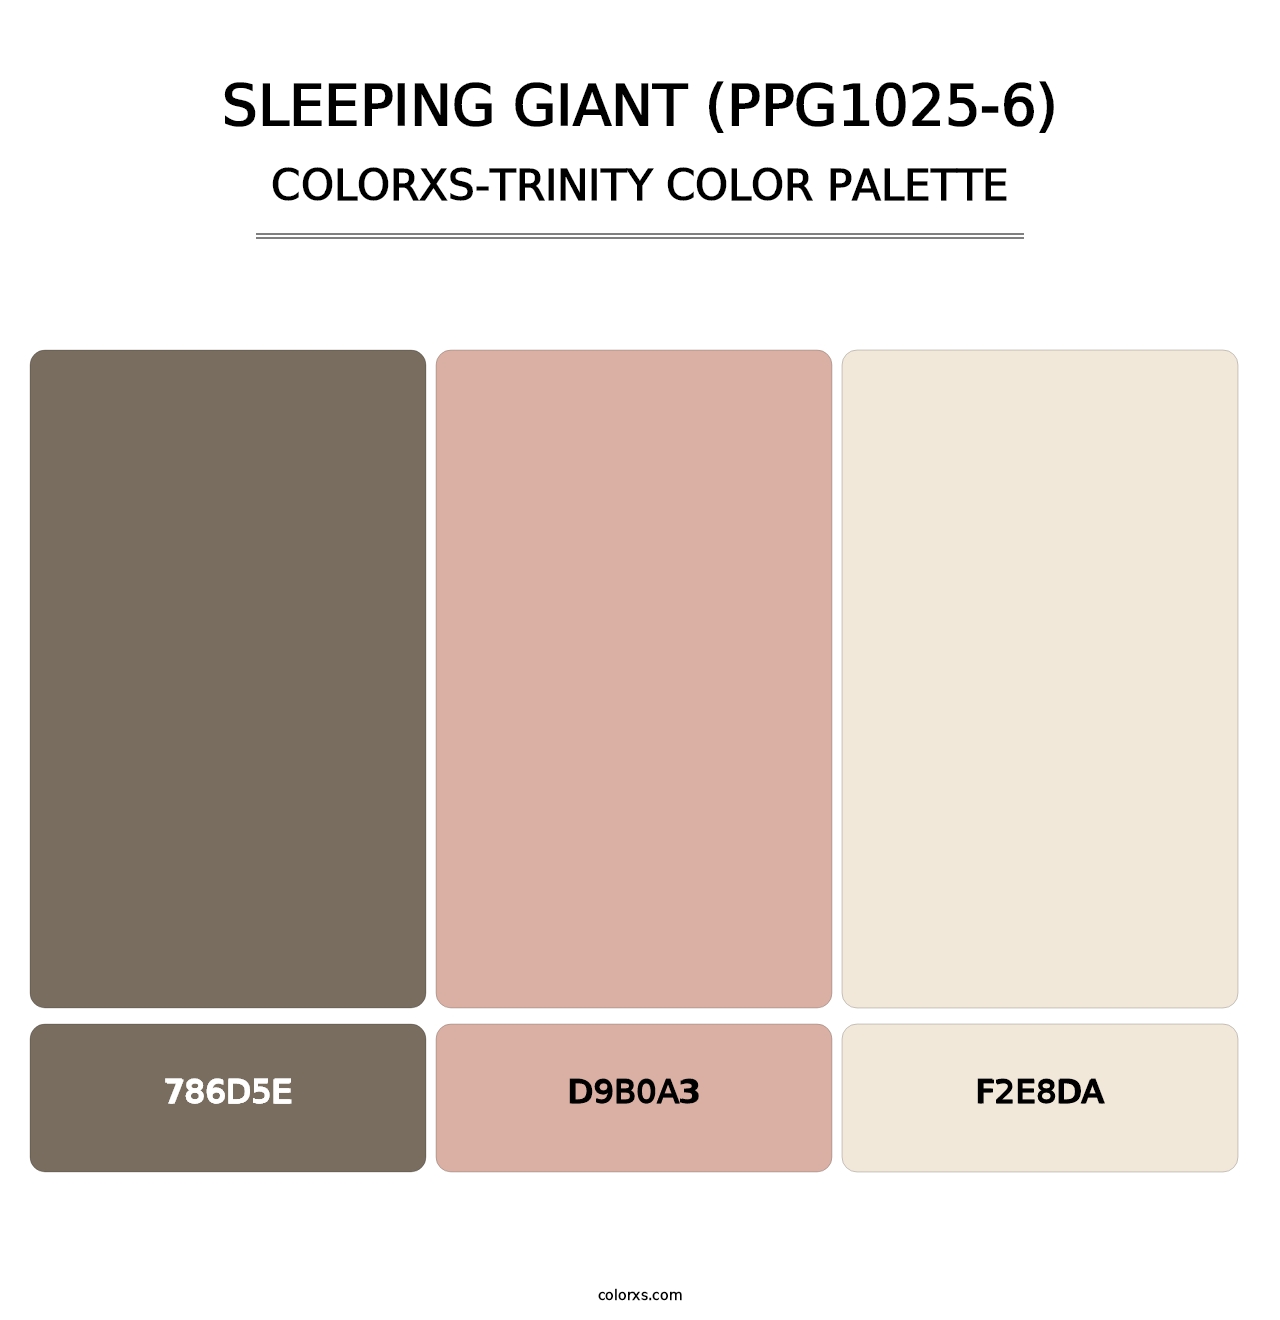 Sleeping Giant (PPG1025-6) - Colorxs Trinity Palette